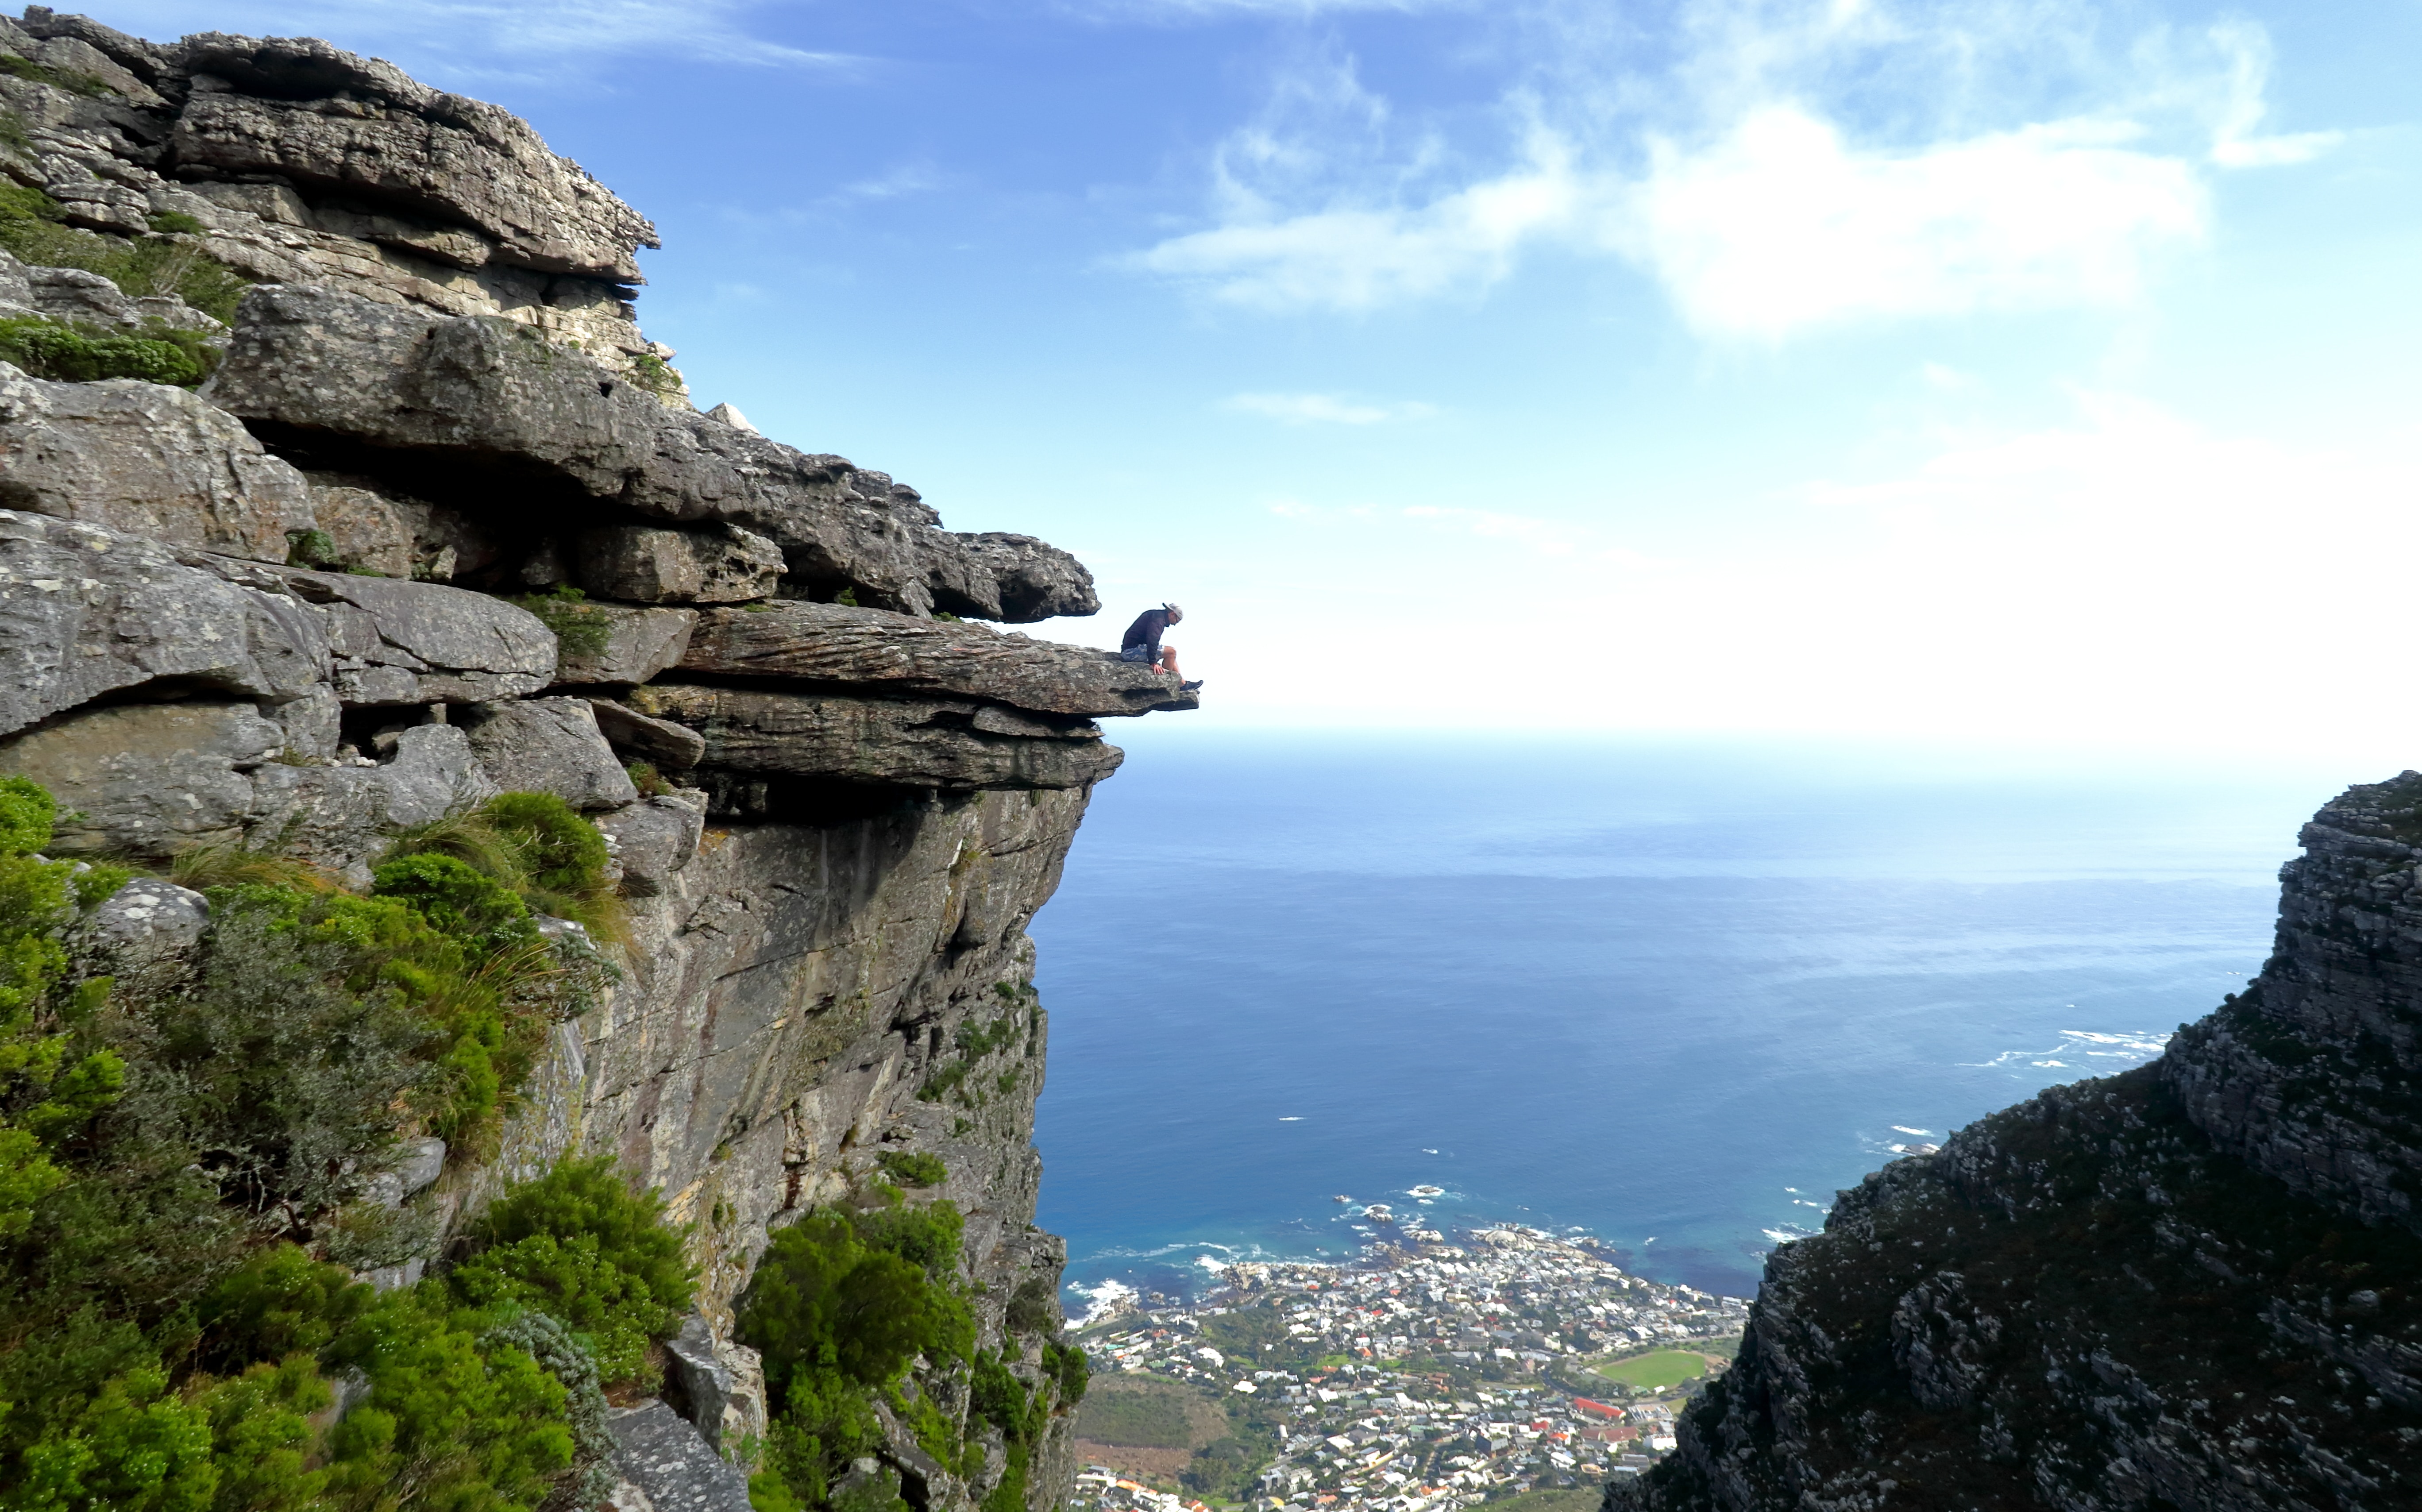 Man sitting precariously over cliff